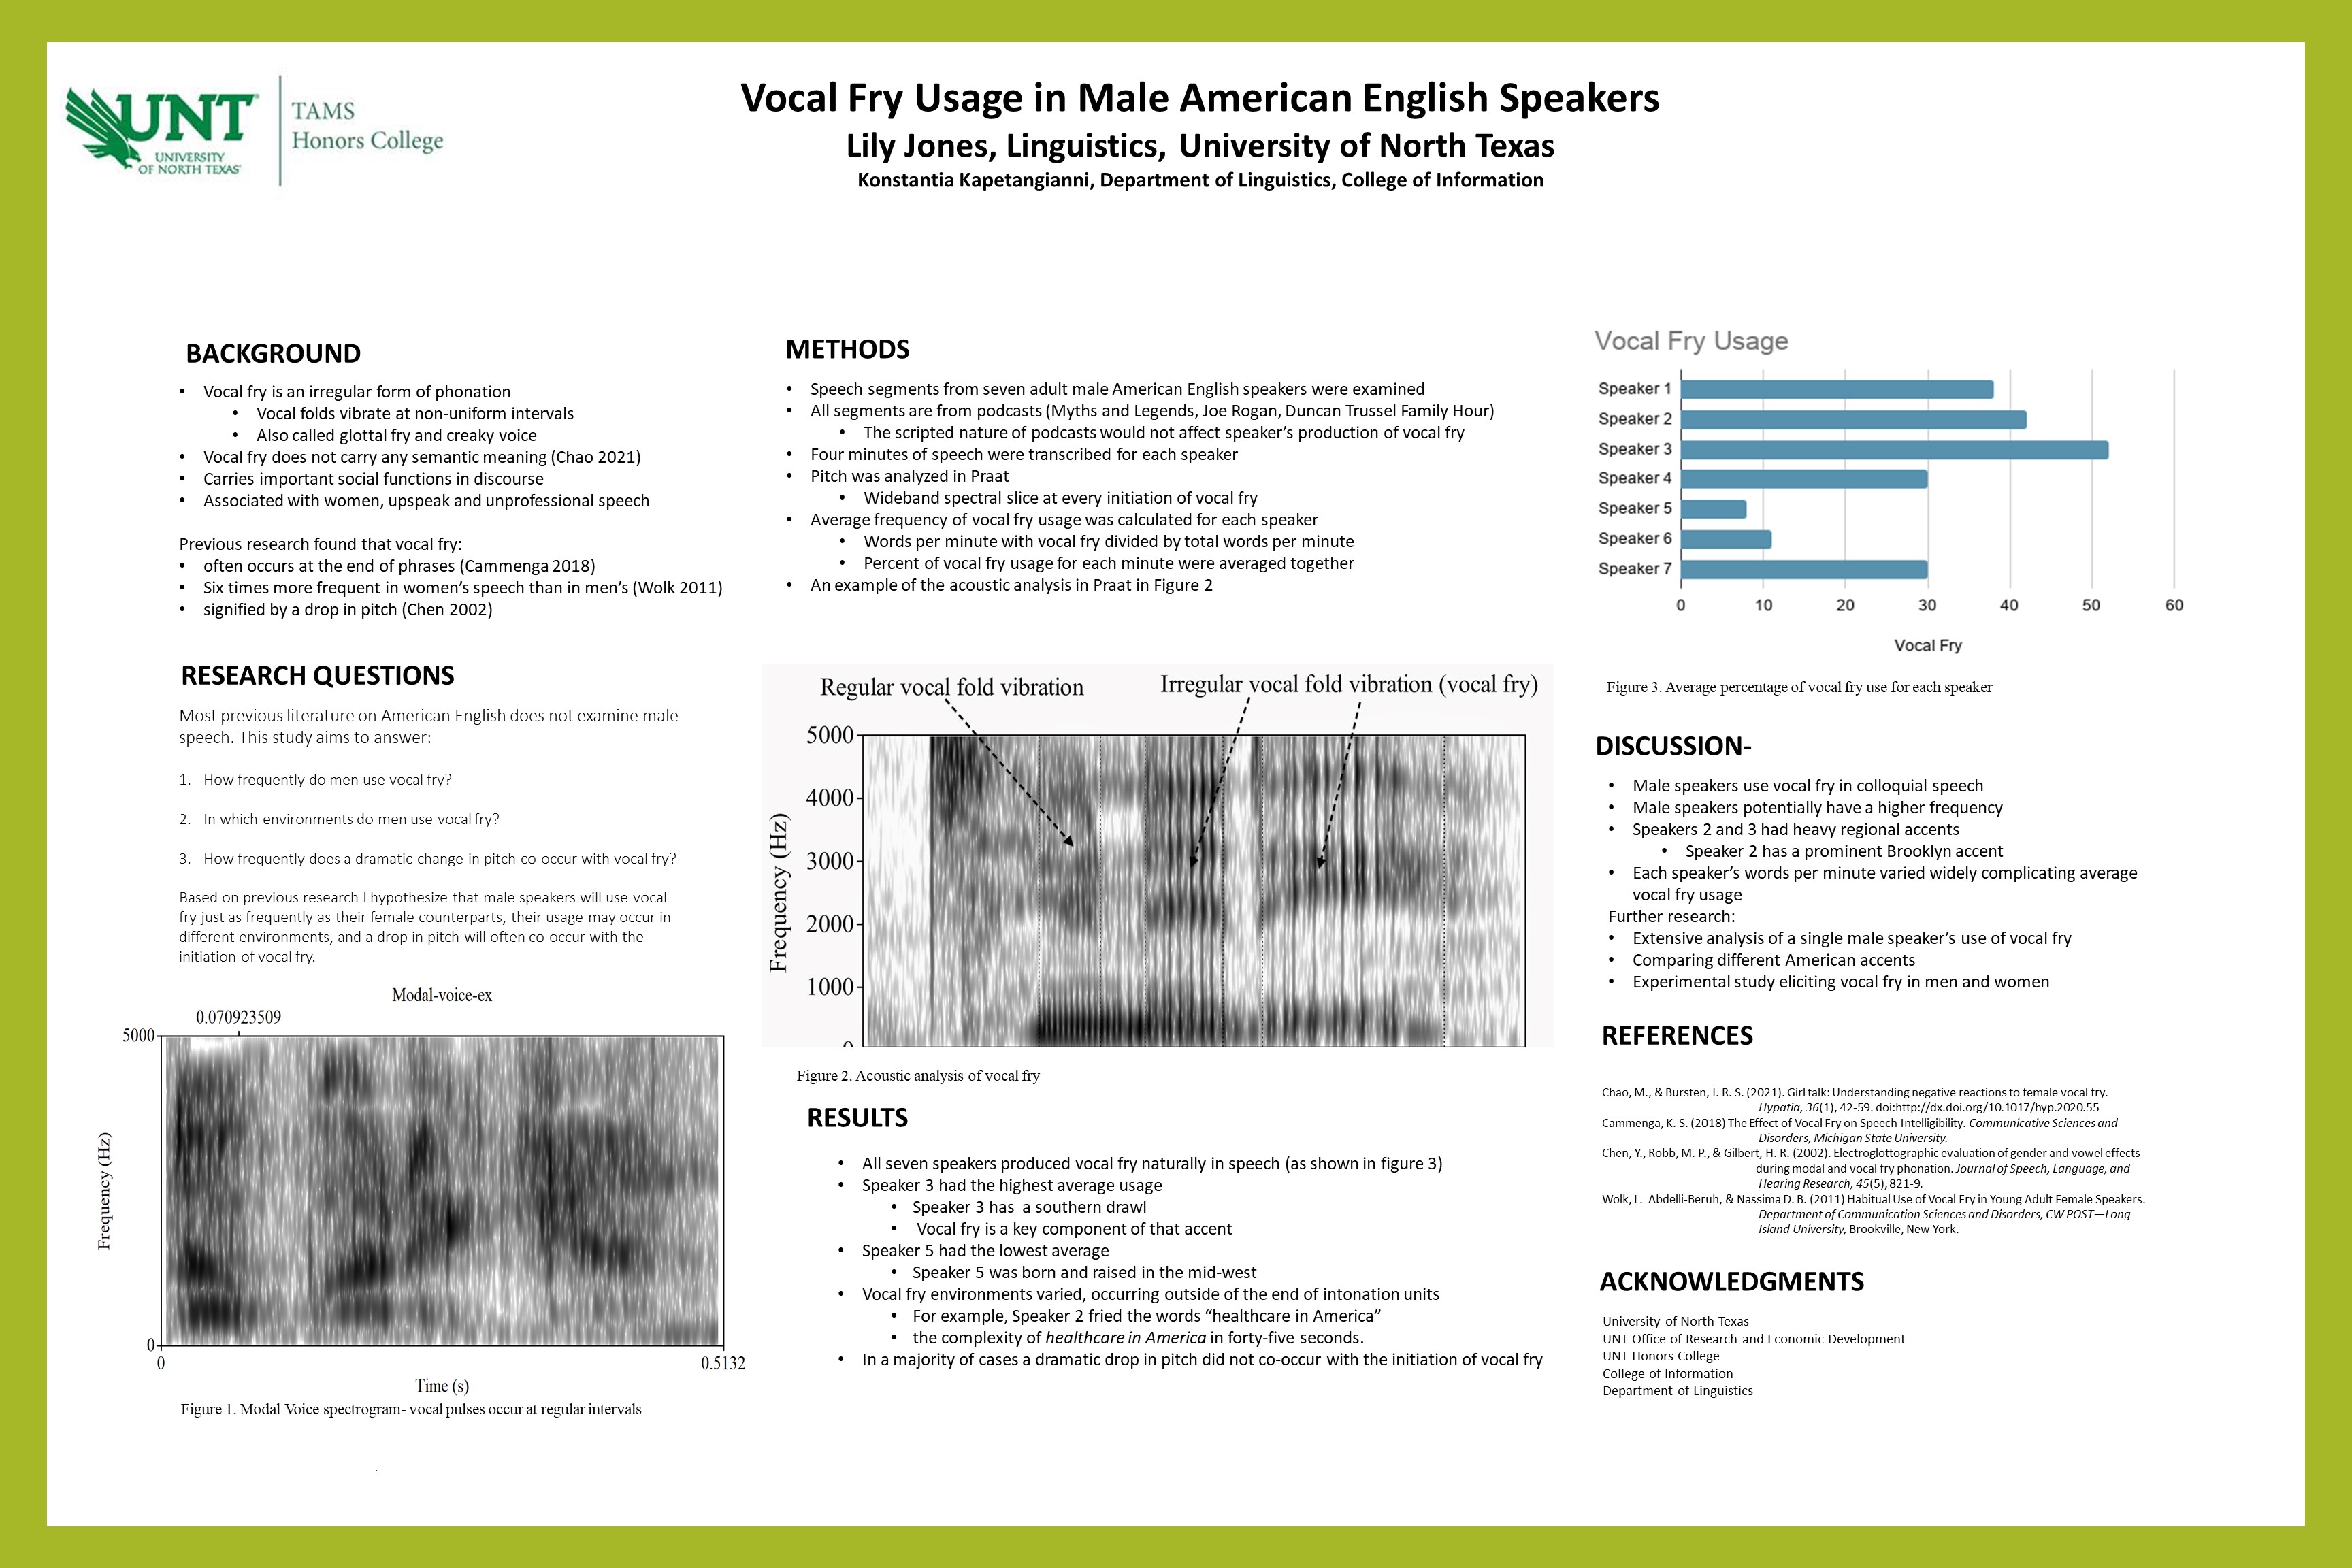 Vocal Fry Usage in Male American English Speakers